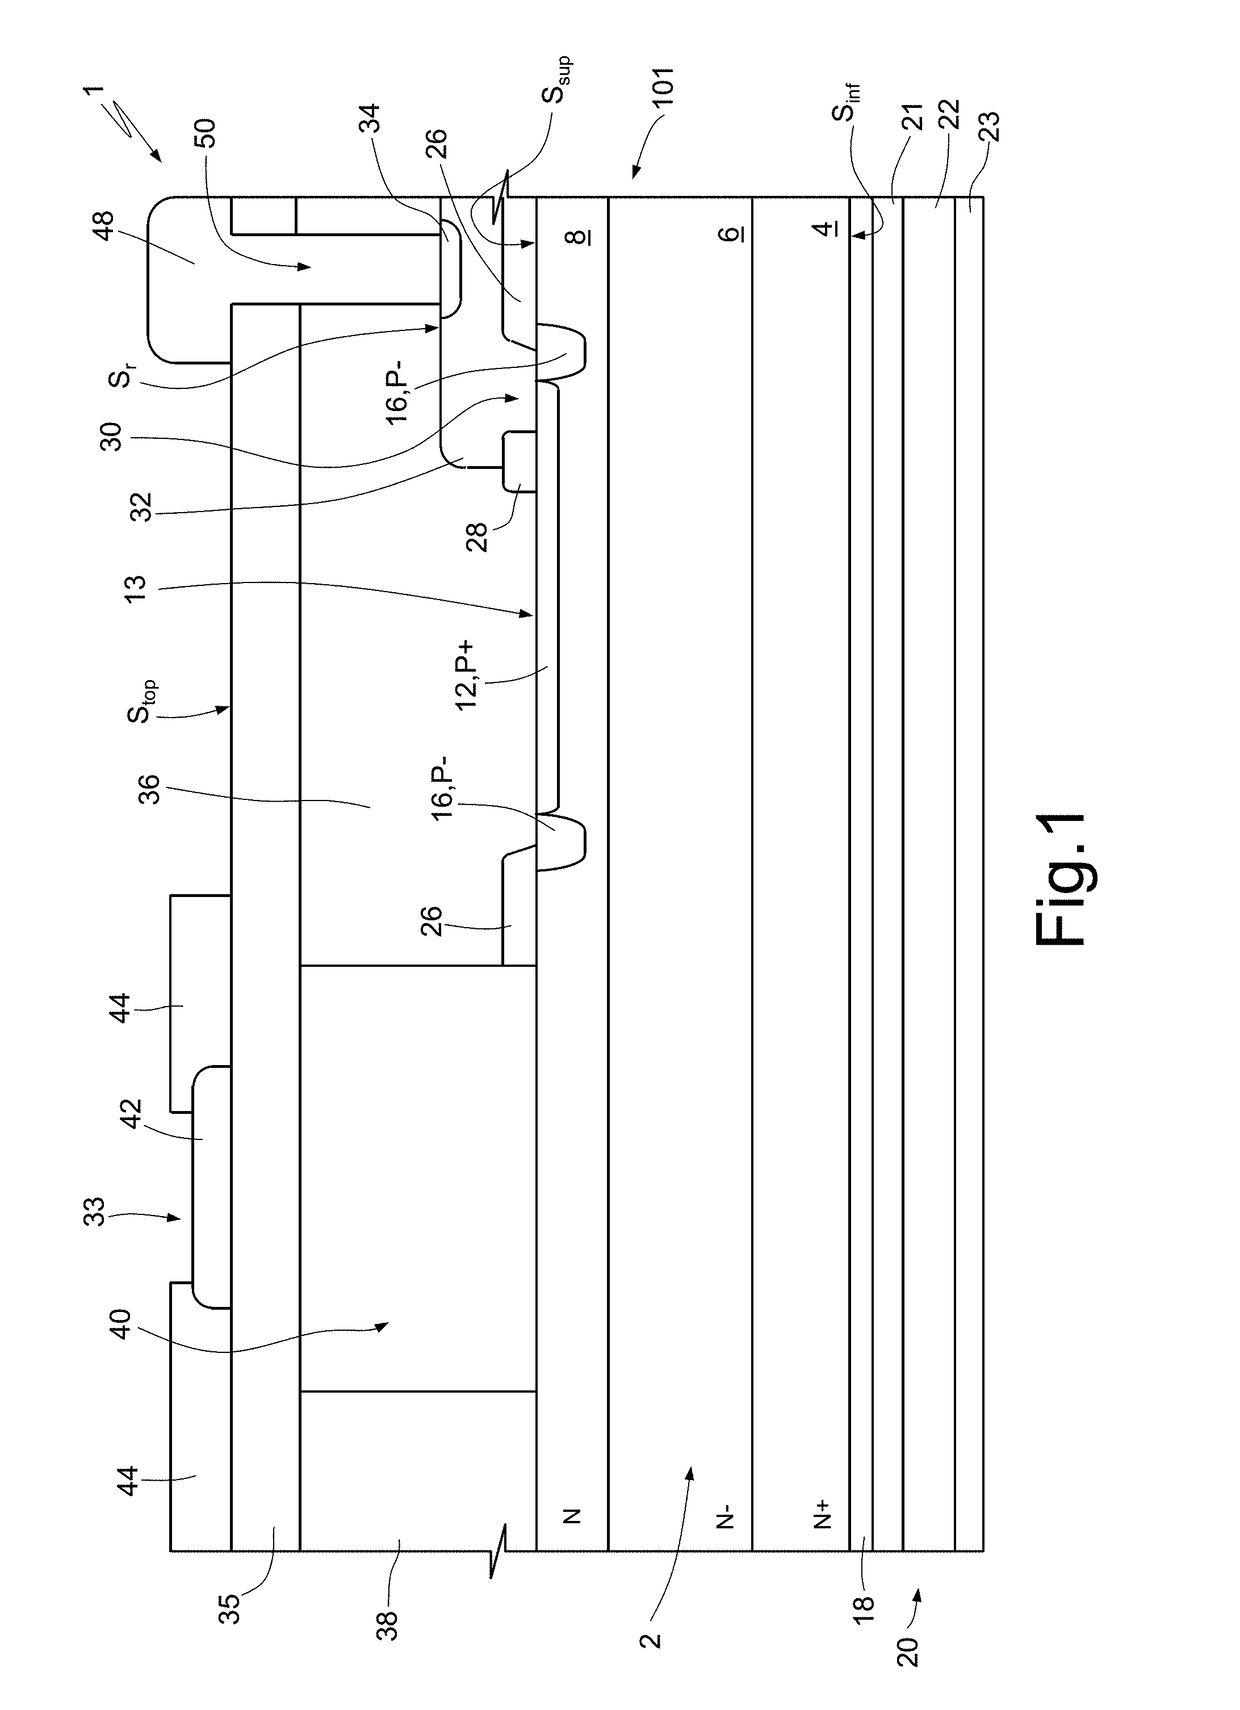 Semiconductor device for detecting ultraviolet and infrared radiation and related manufacturing process